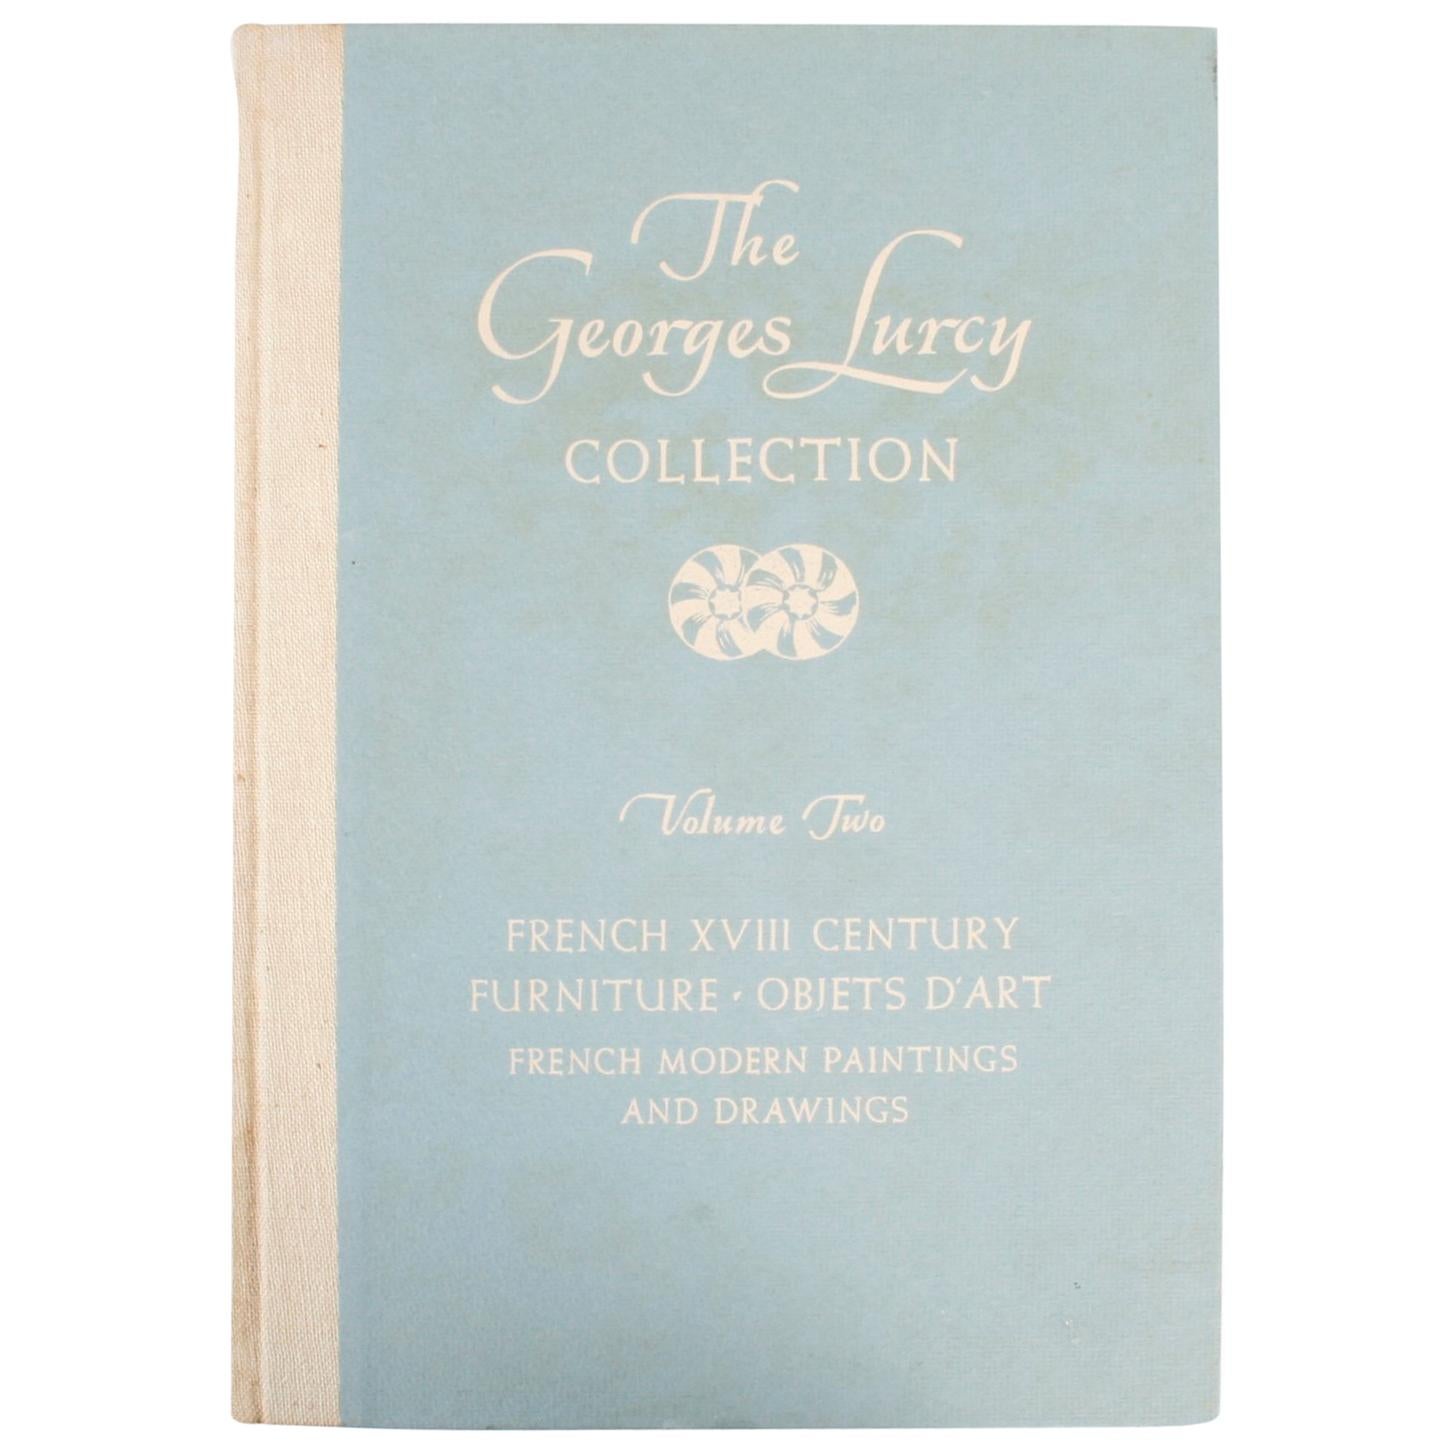 Parke-Bernet the Collection of Georges Lurcy, November 8 and 9, 1957